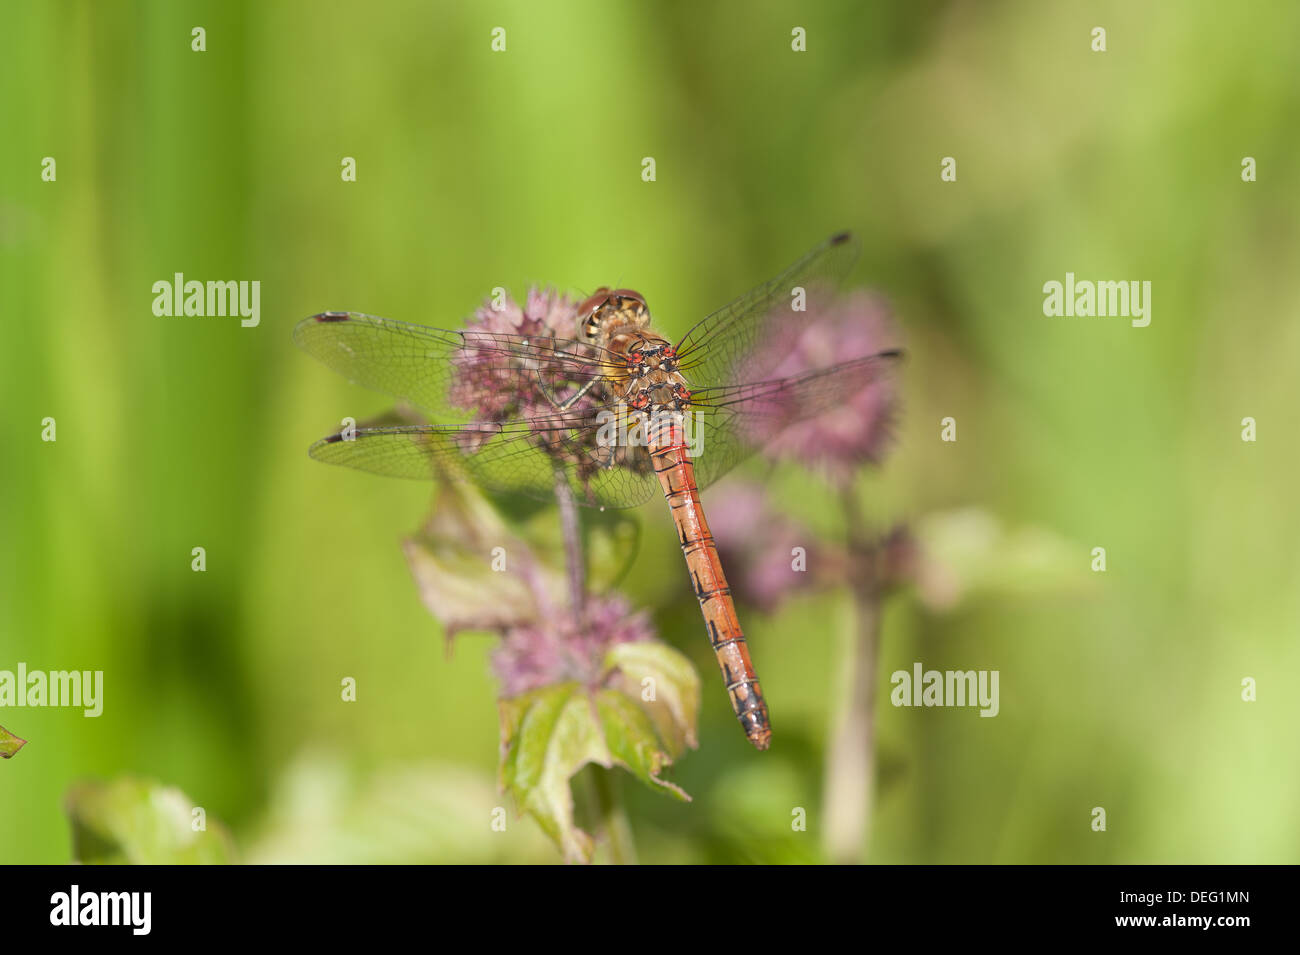 Red-veined Darter male dragon fly resting on pond aquatic plant leaves Stock Photo